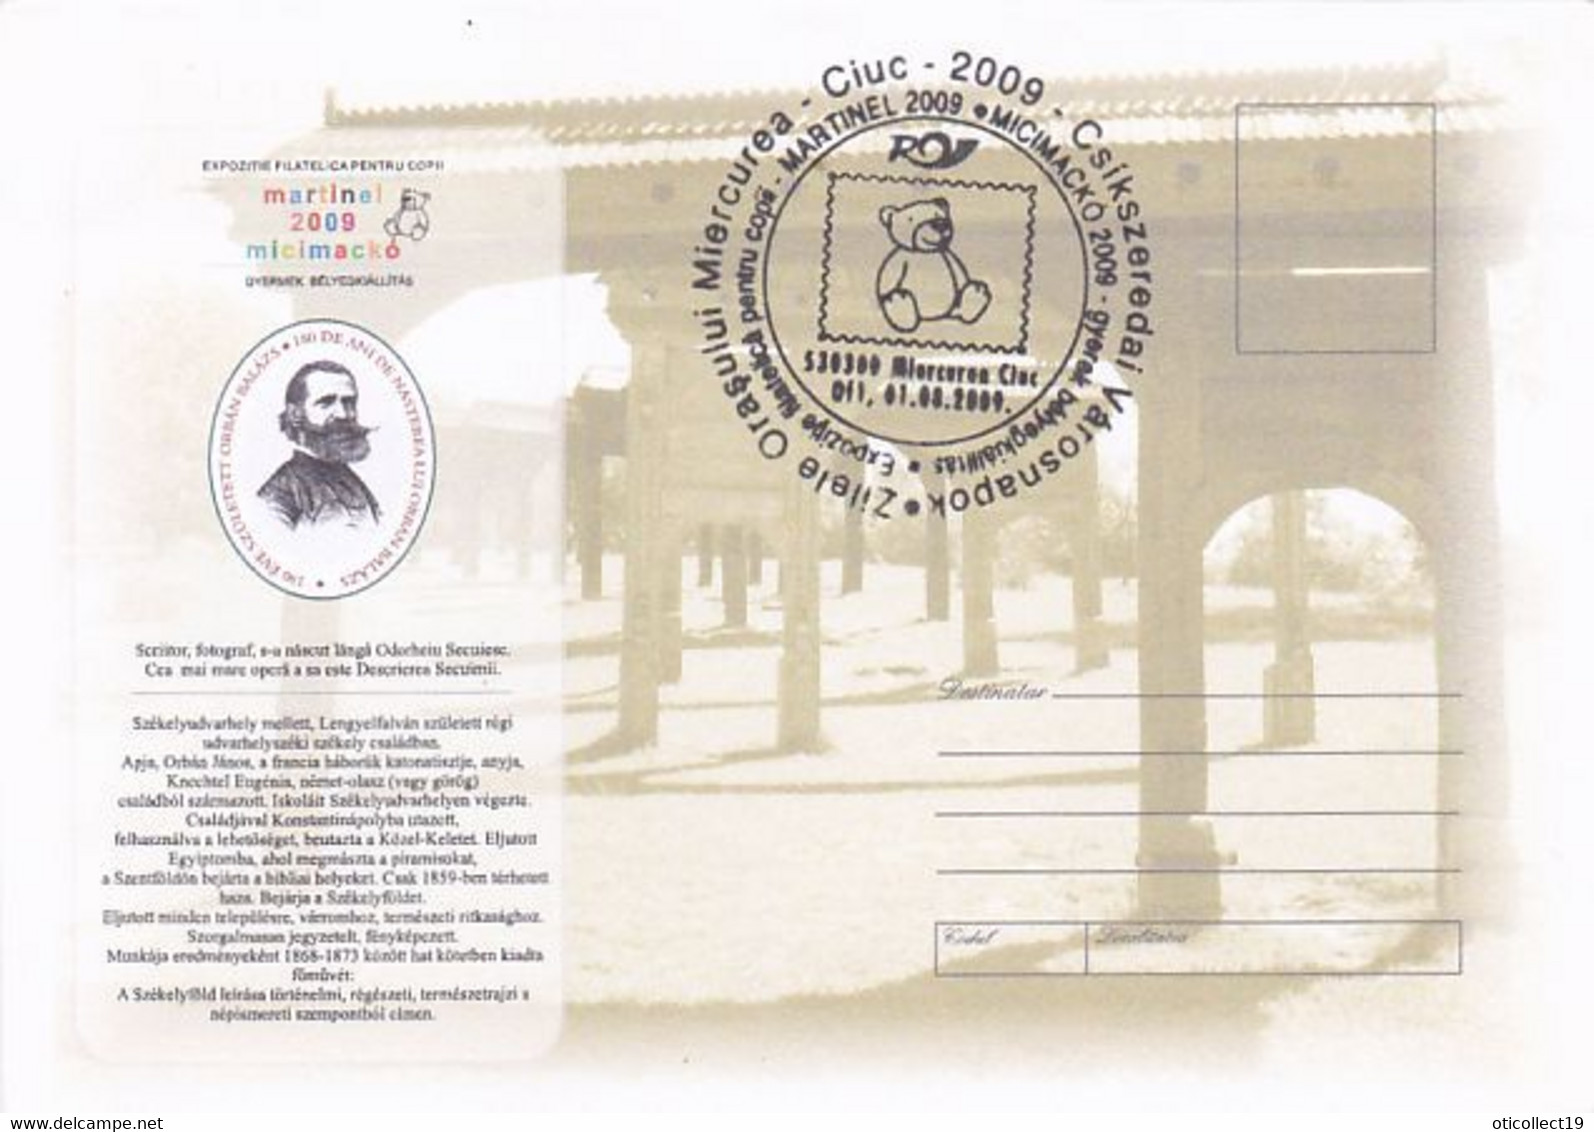 ORBAN BALAZS, WRITER, MARTINEL CHILDRENS PHILATELIC EXHIBITION, SPECIAL COVER, 2009, ROMANIA - Covers & Documents